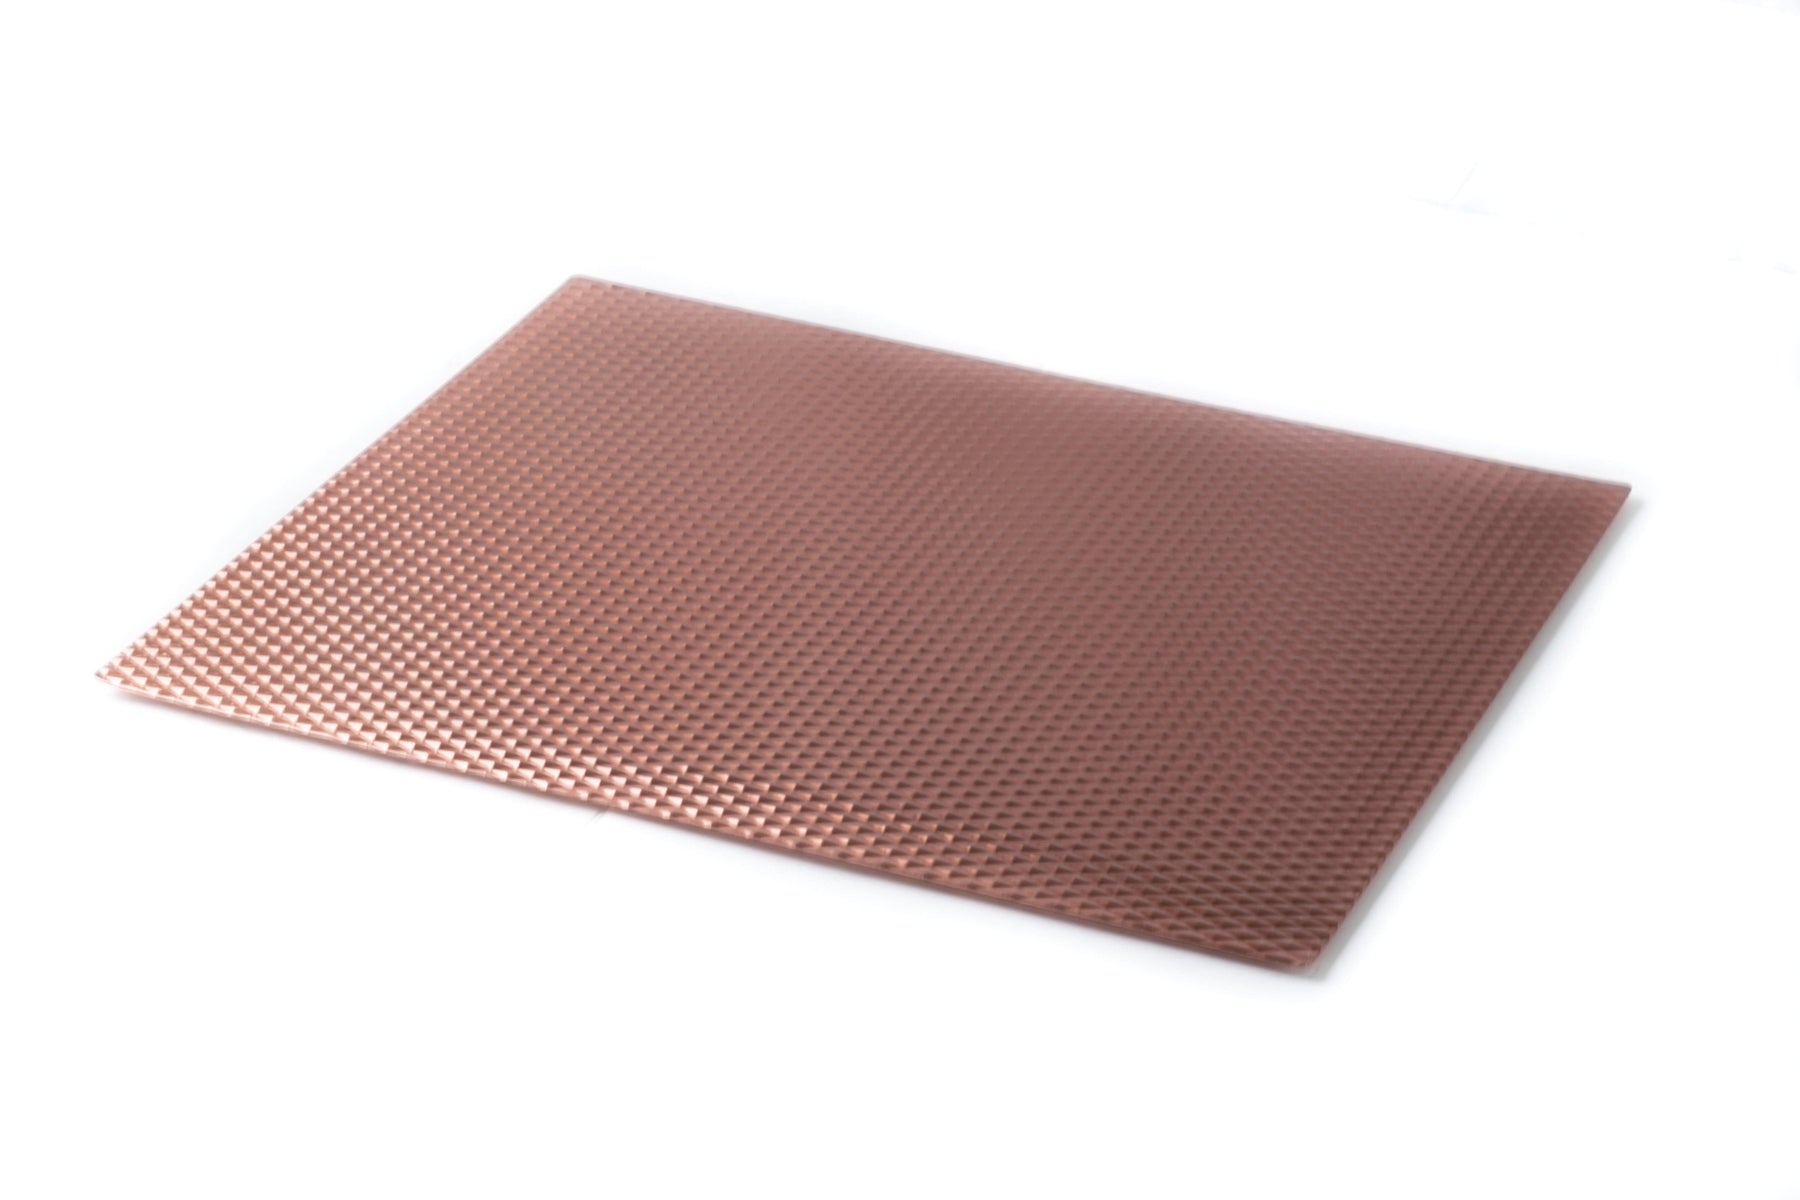 Insulated Non Skid Kitchen Counter Saver Protection Mat Liners